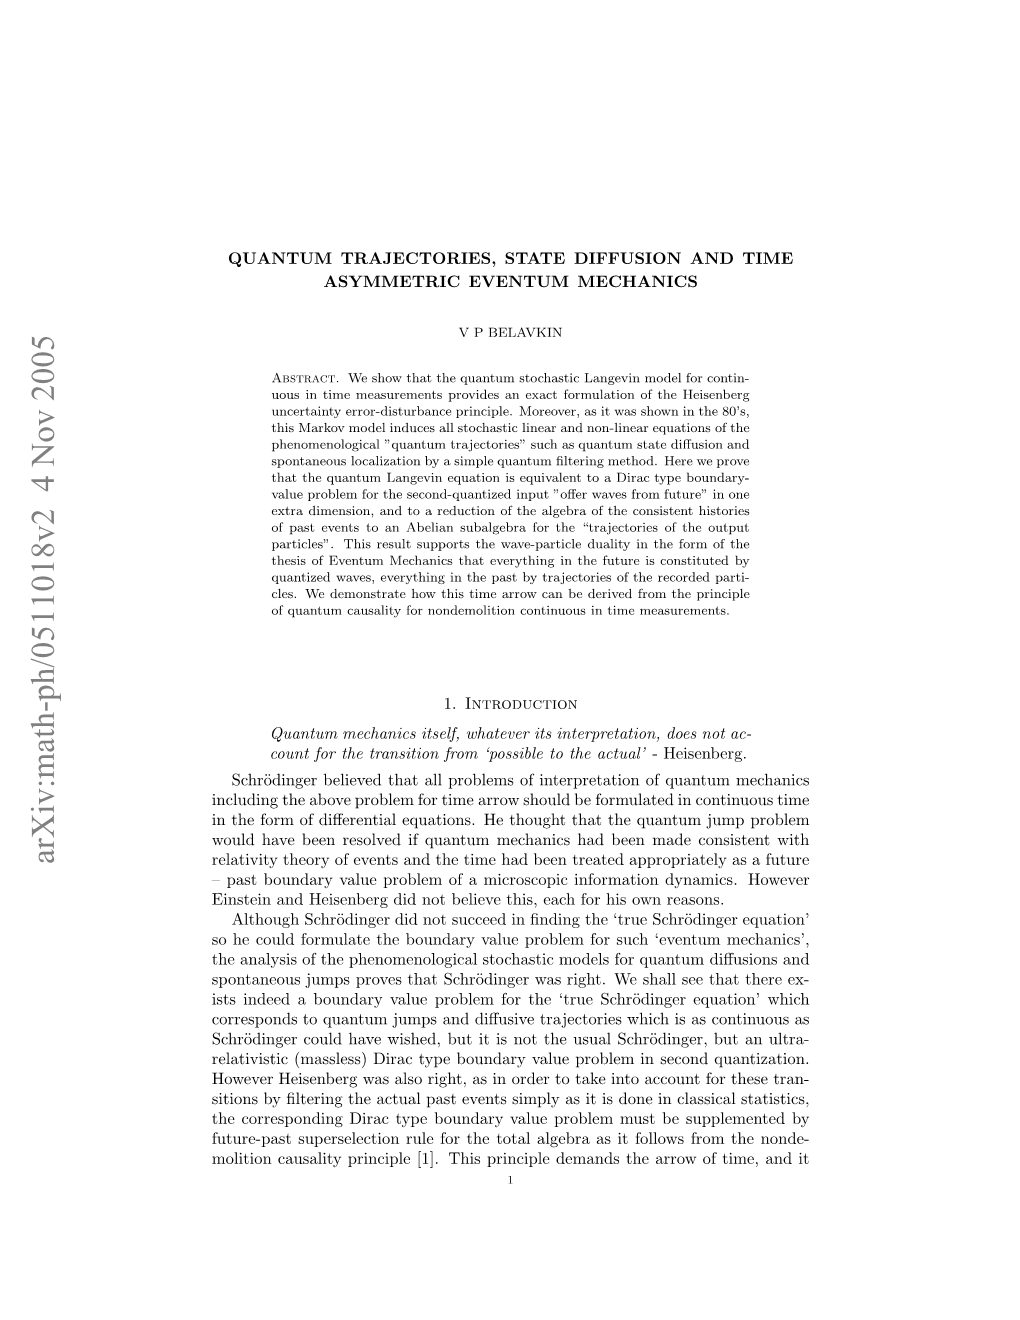 Quantum Trajectories, State Diffusion and Time Asymmetric Eventum Mechanics